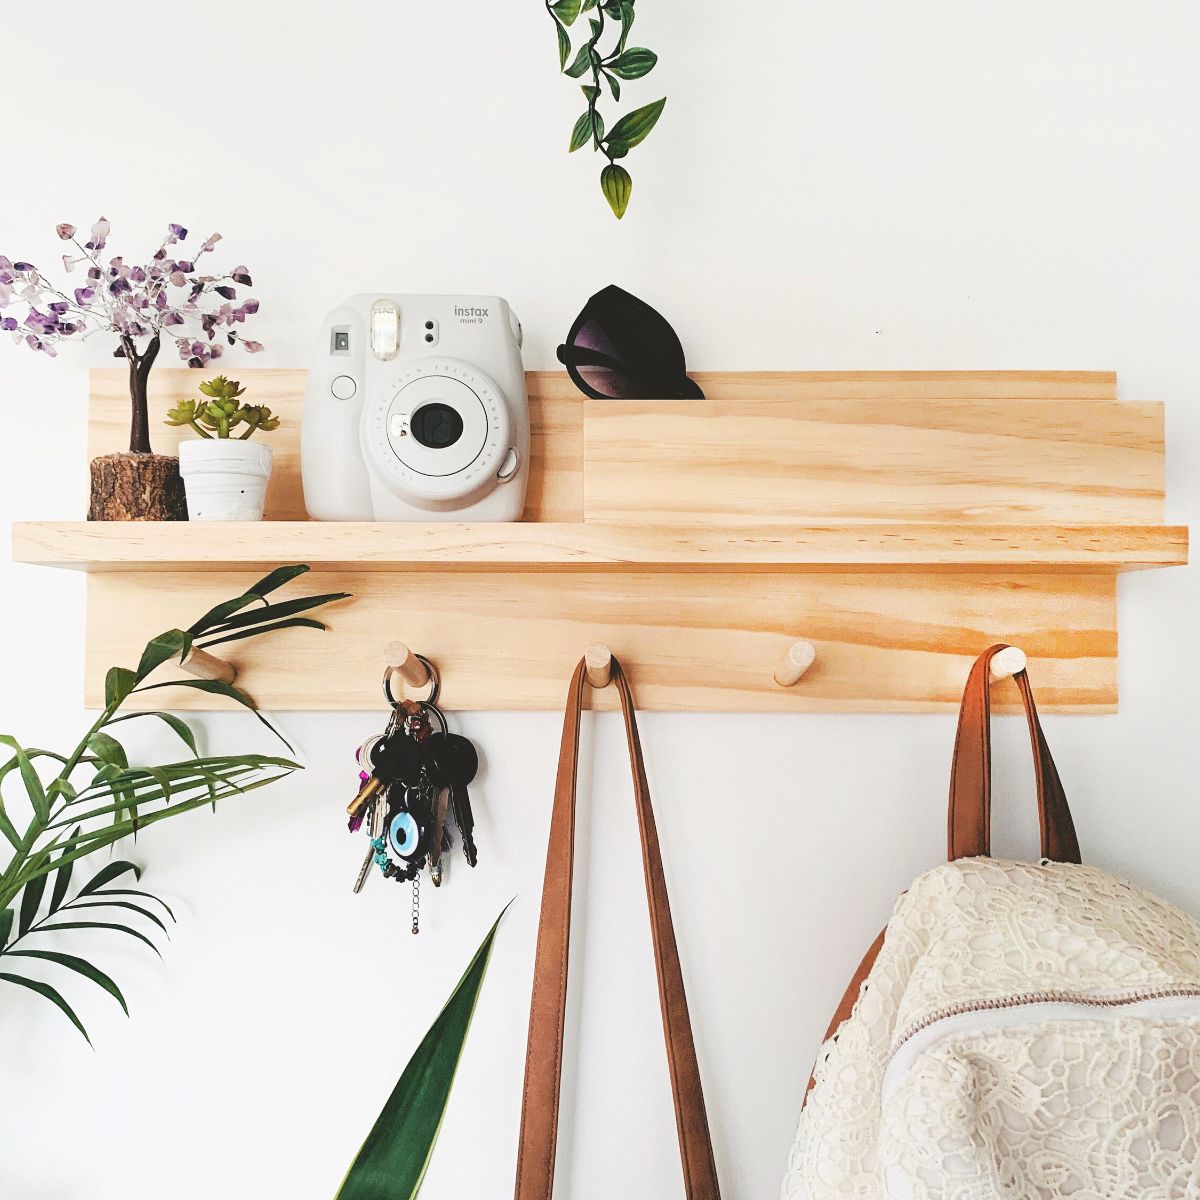 All-In-One Coat Rack Entryway Organiser Shelf. This item is 55cm with Pine Wood and Raw Finish. 